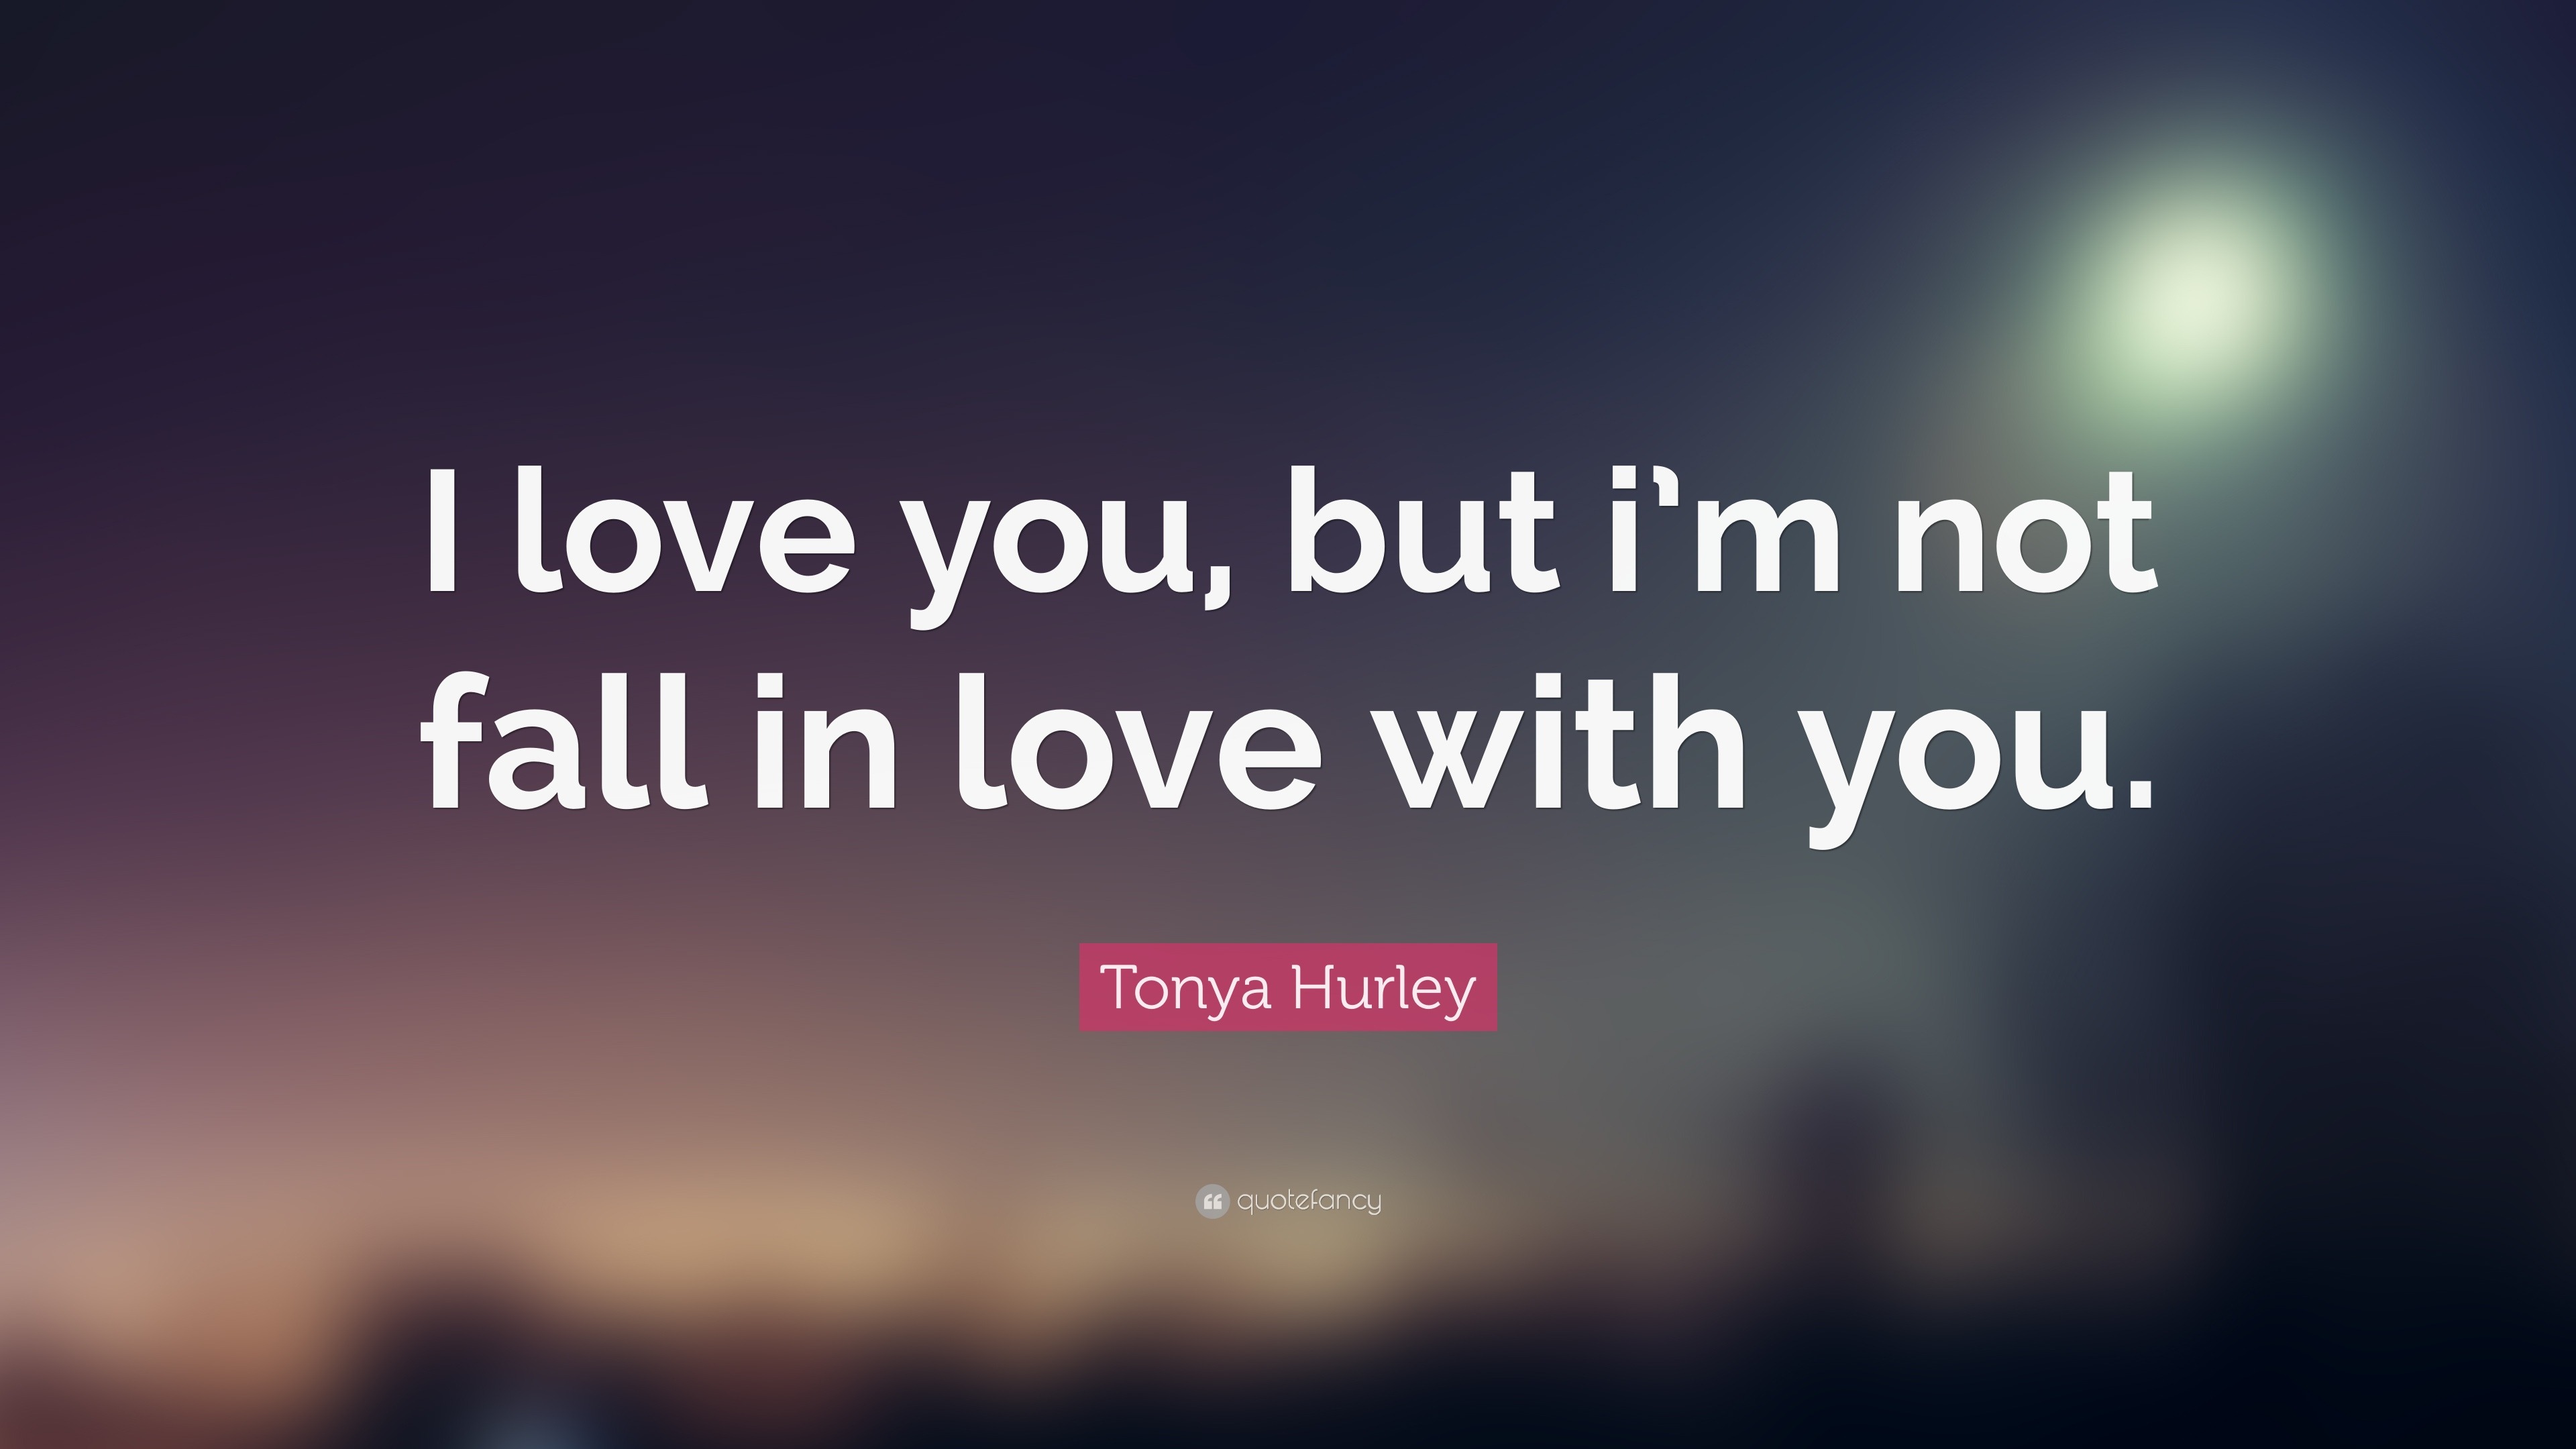 Tonya Hurley Quote “I love you but i m not fall in